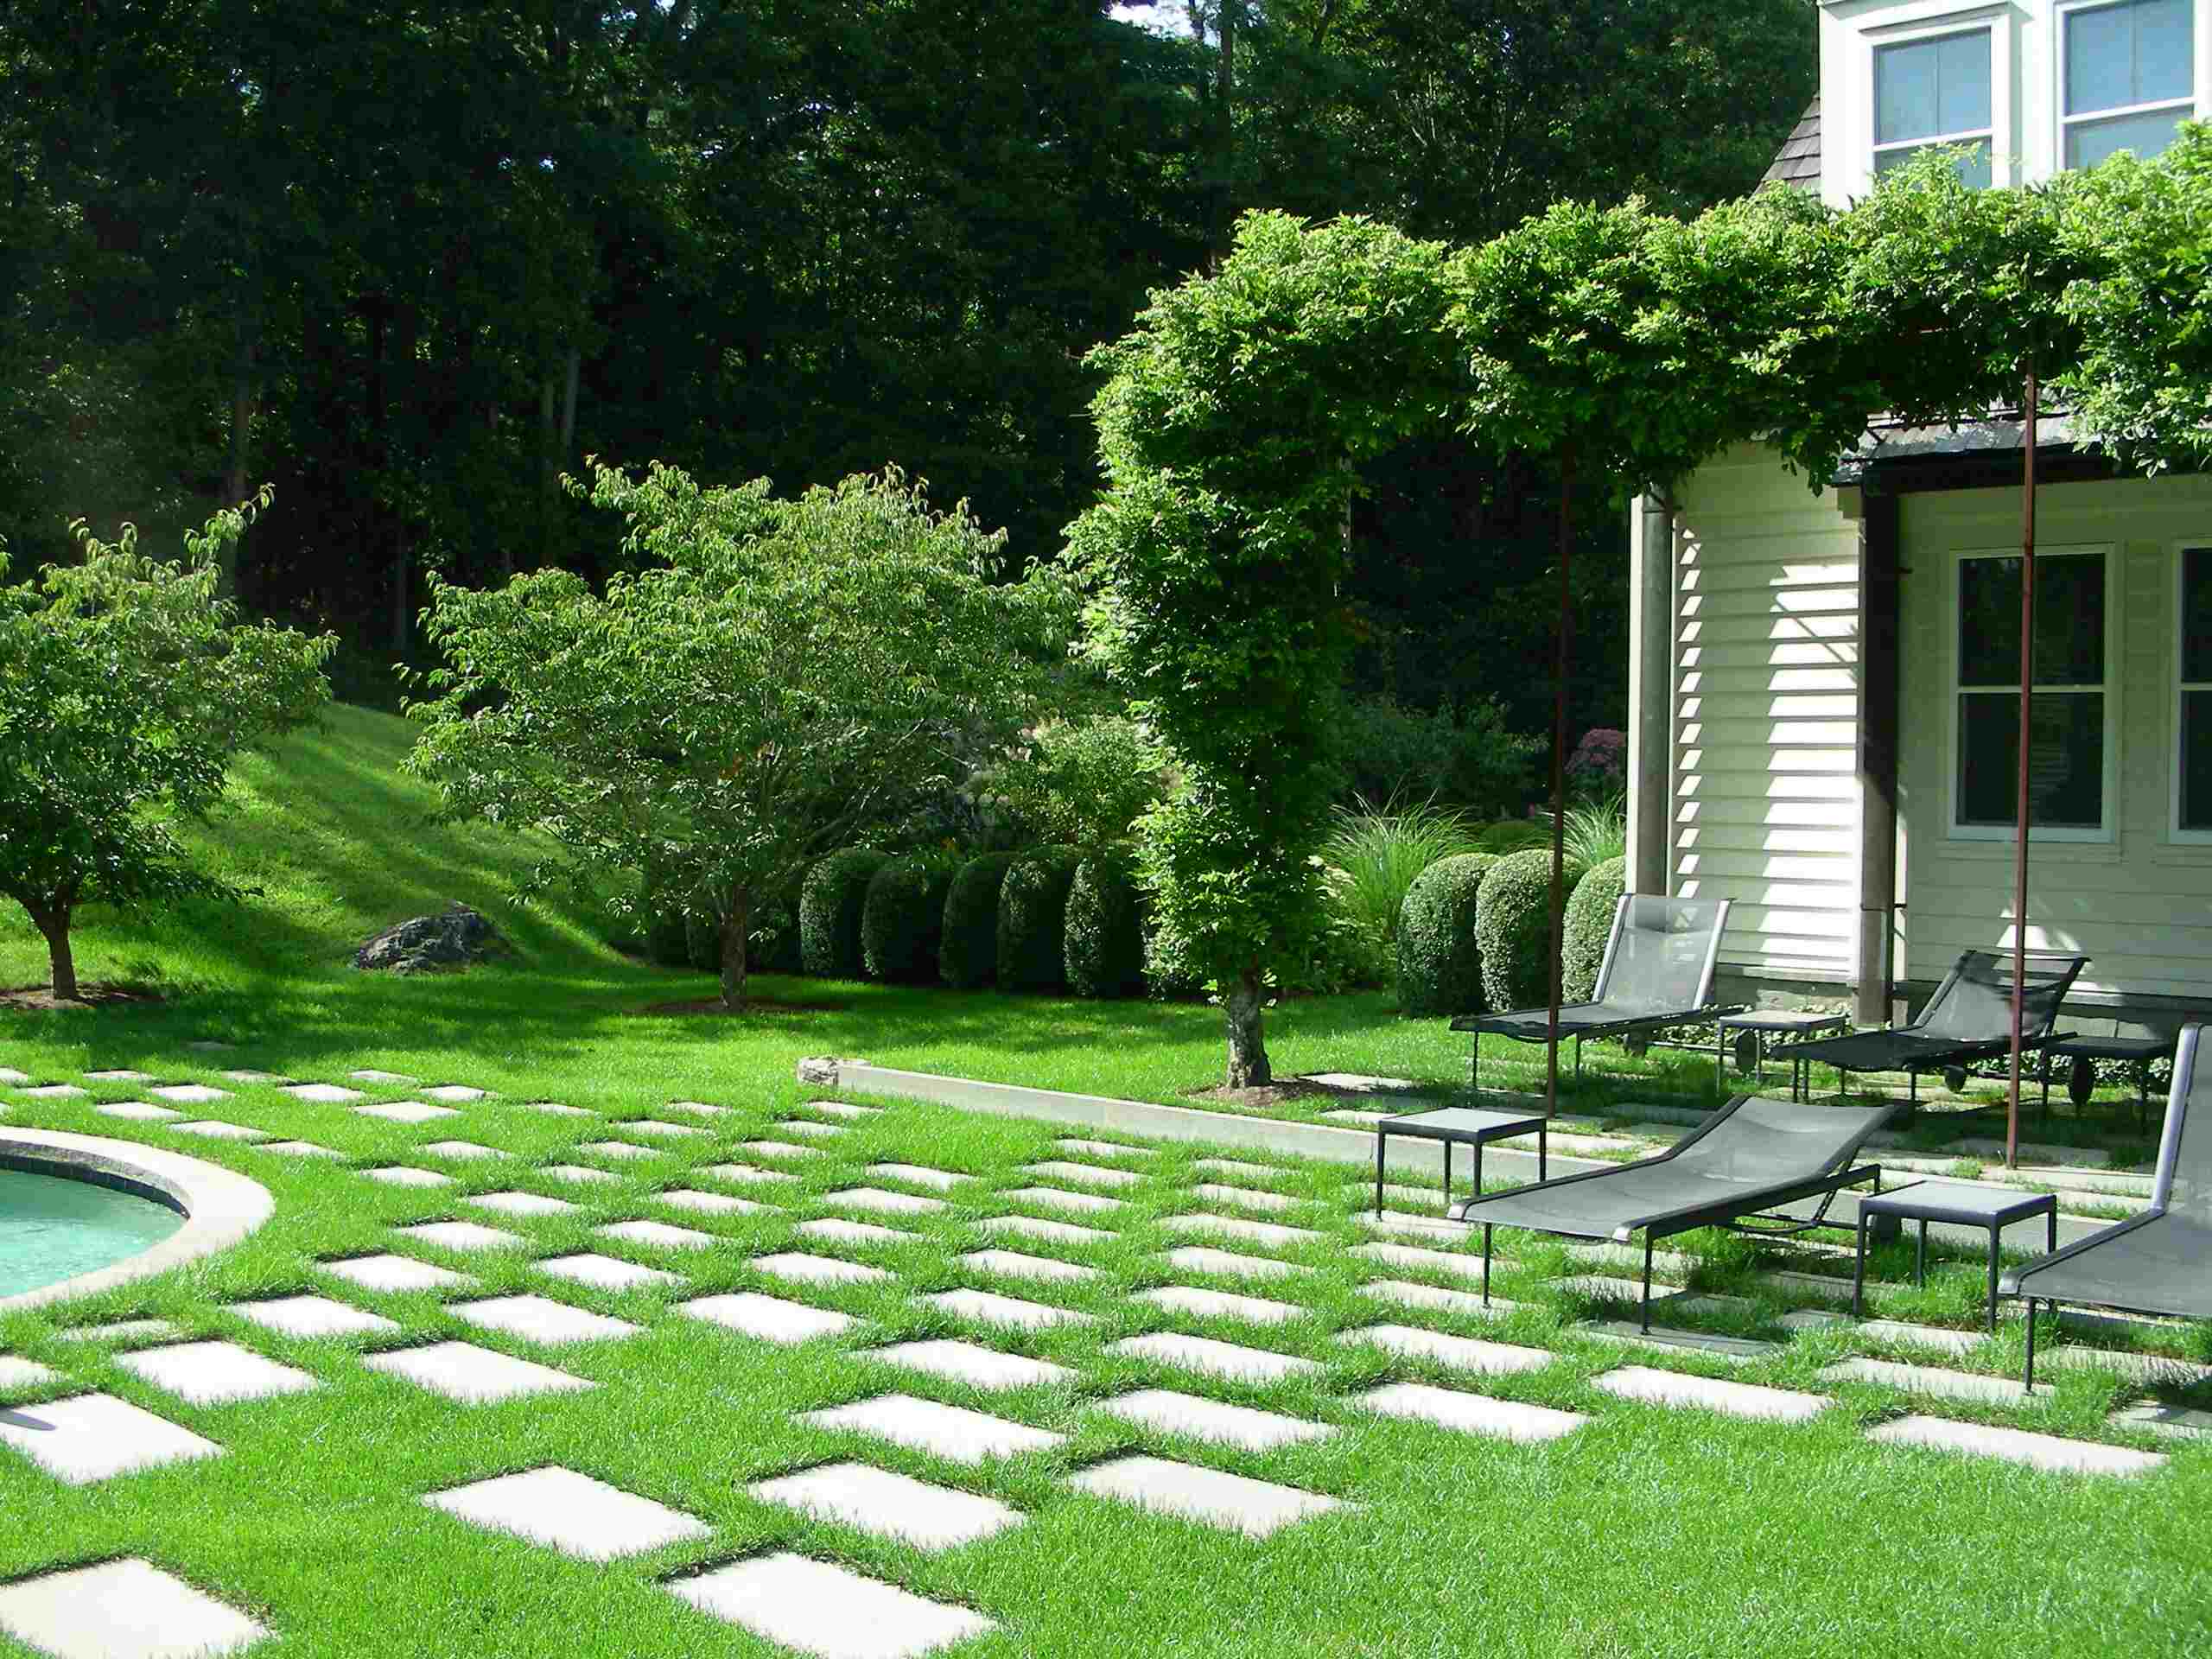 How To Make A Patio On Grass